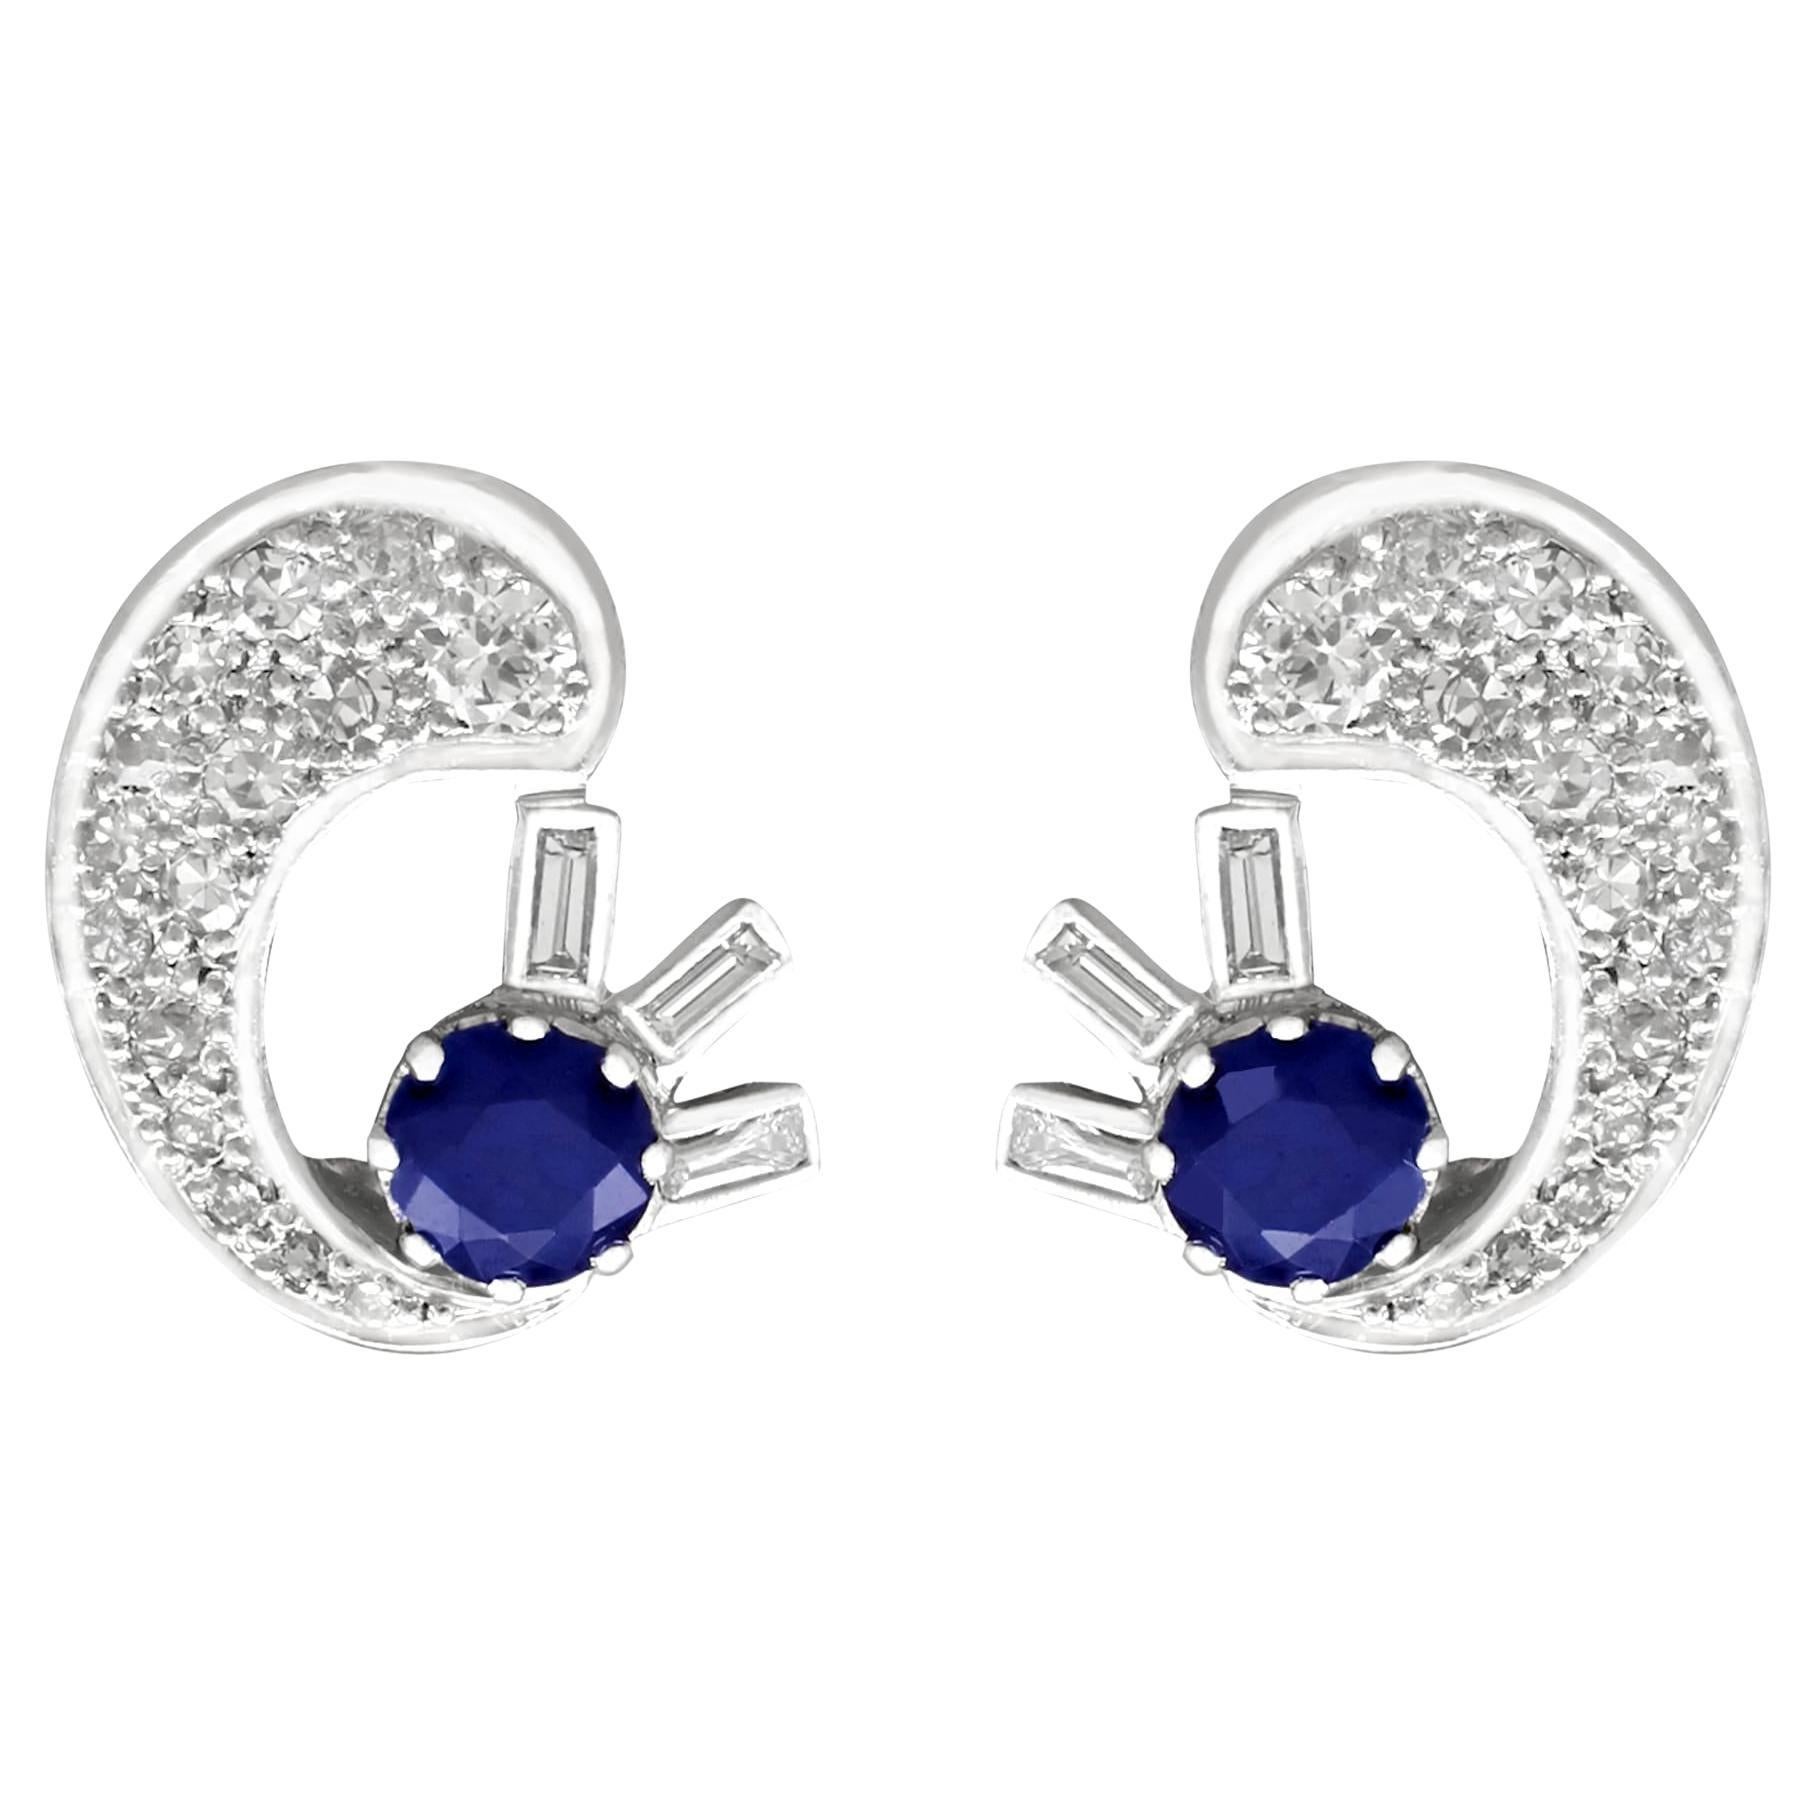 Antique 1.04 Carat Sapphire and 1.75 Carat Diamond White Gold Clip-on Earrings